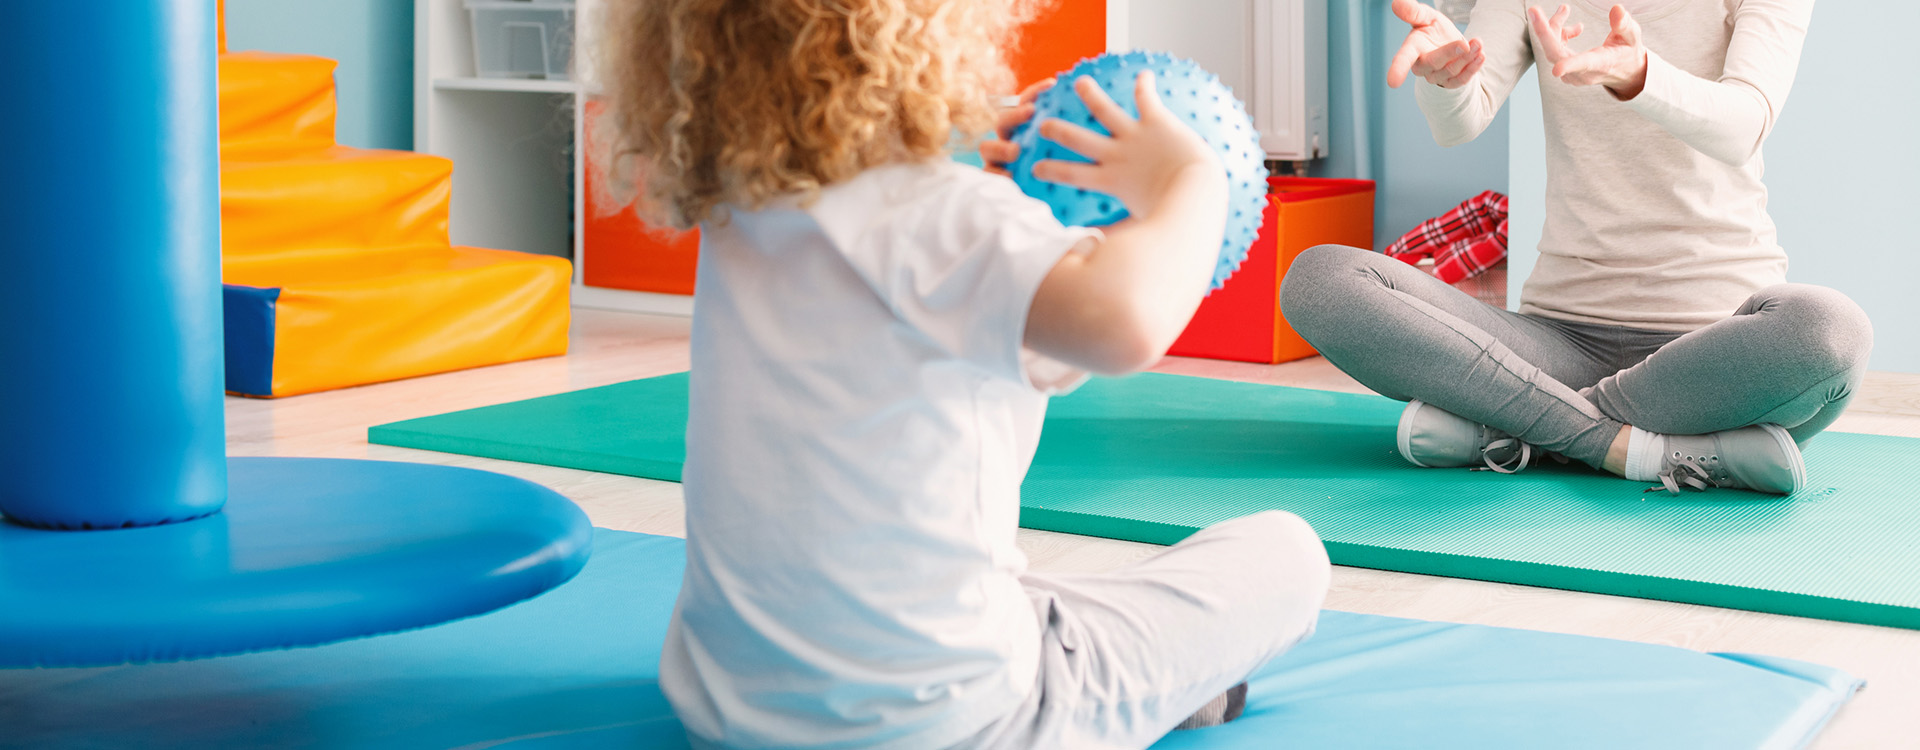 Small boy with ball in occupational therapy setting